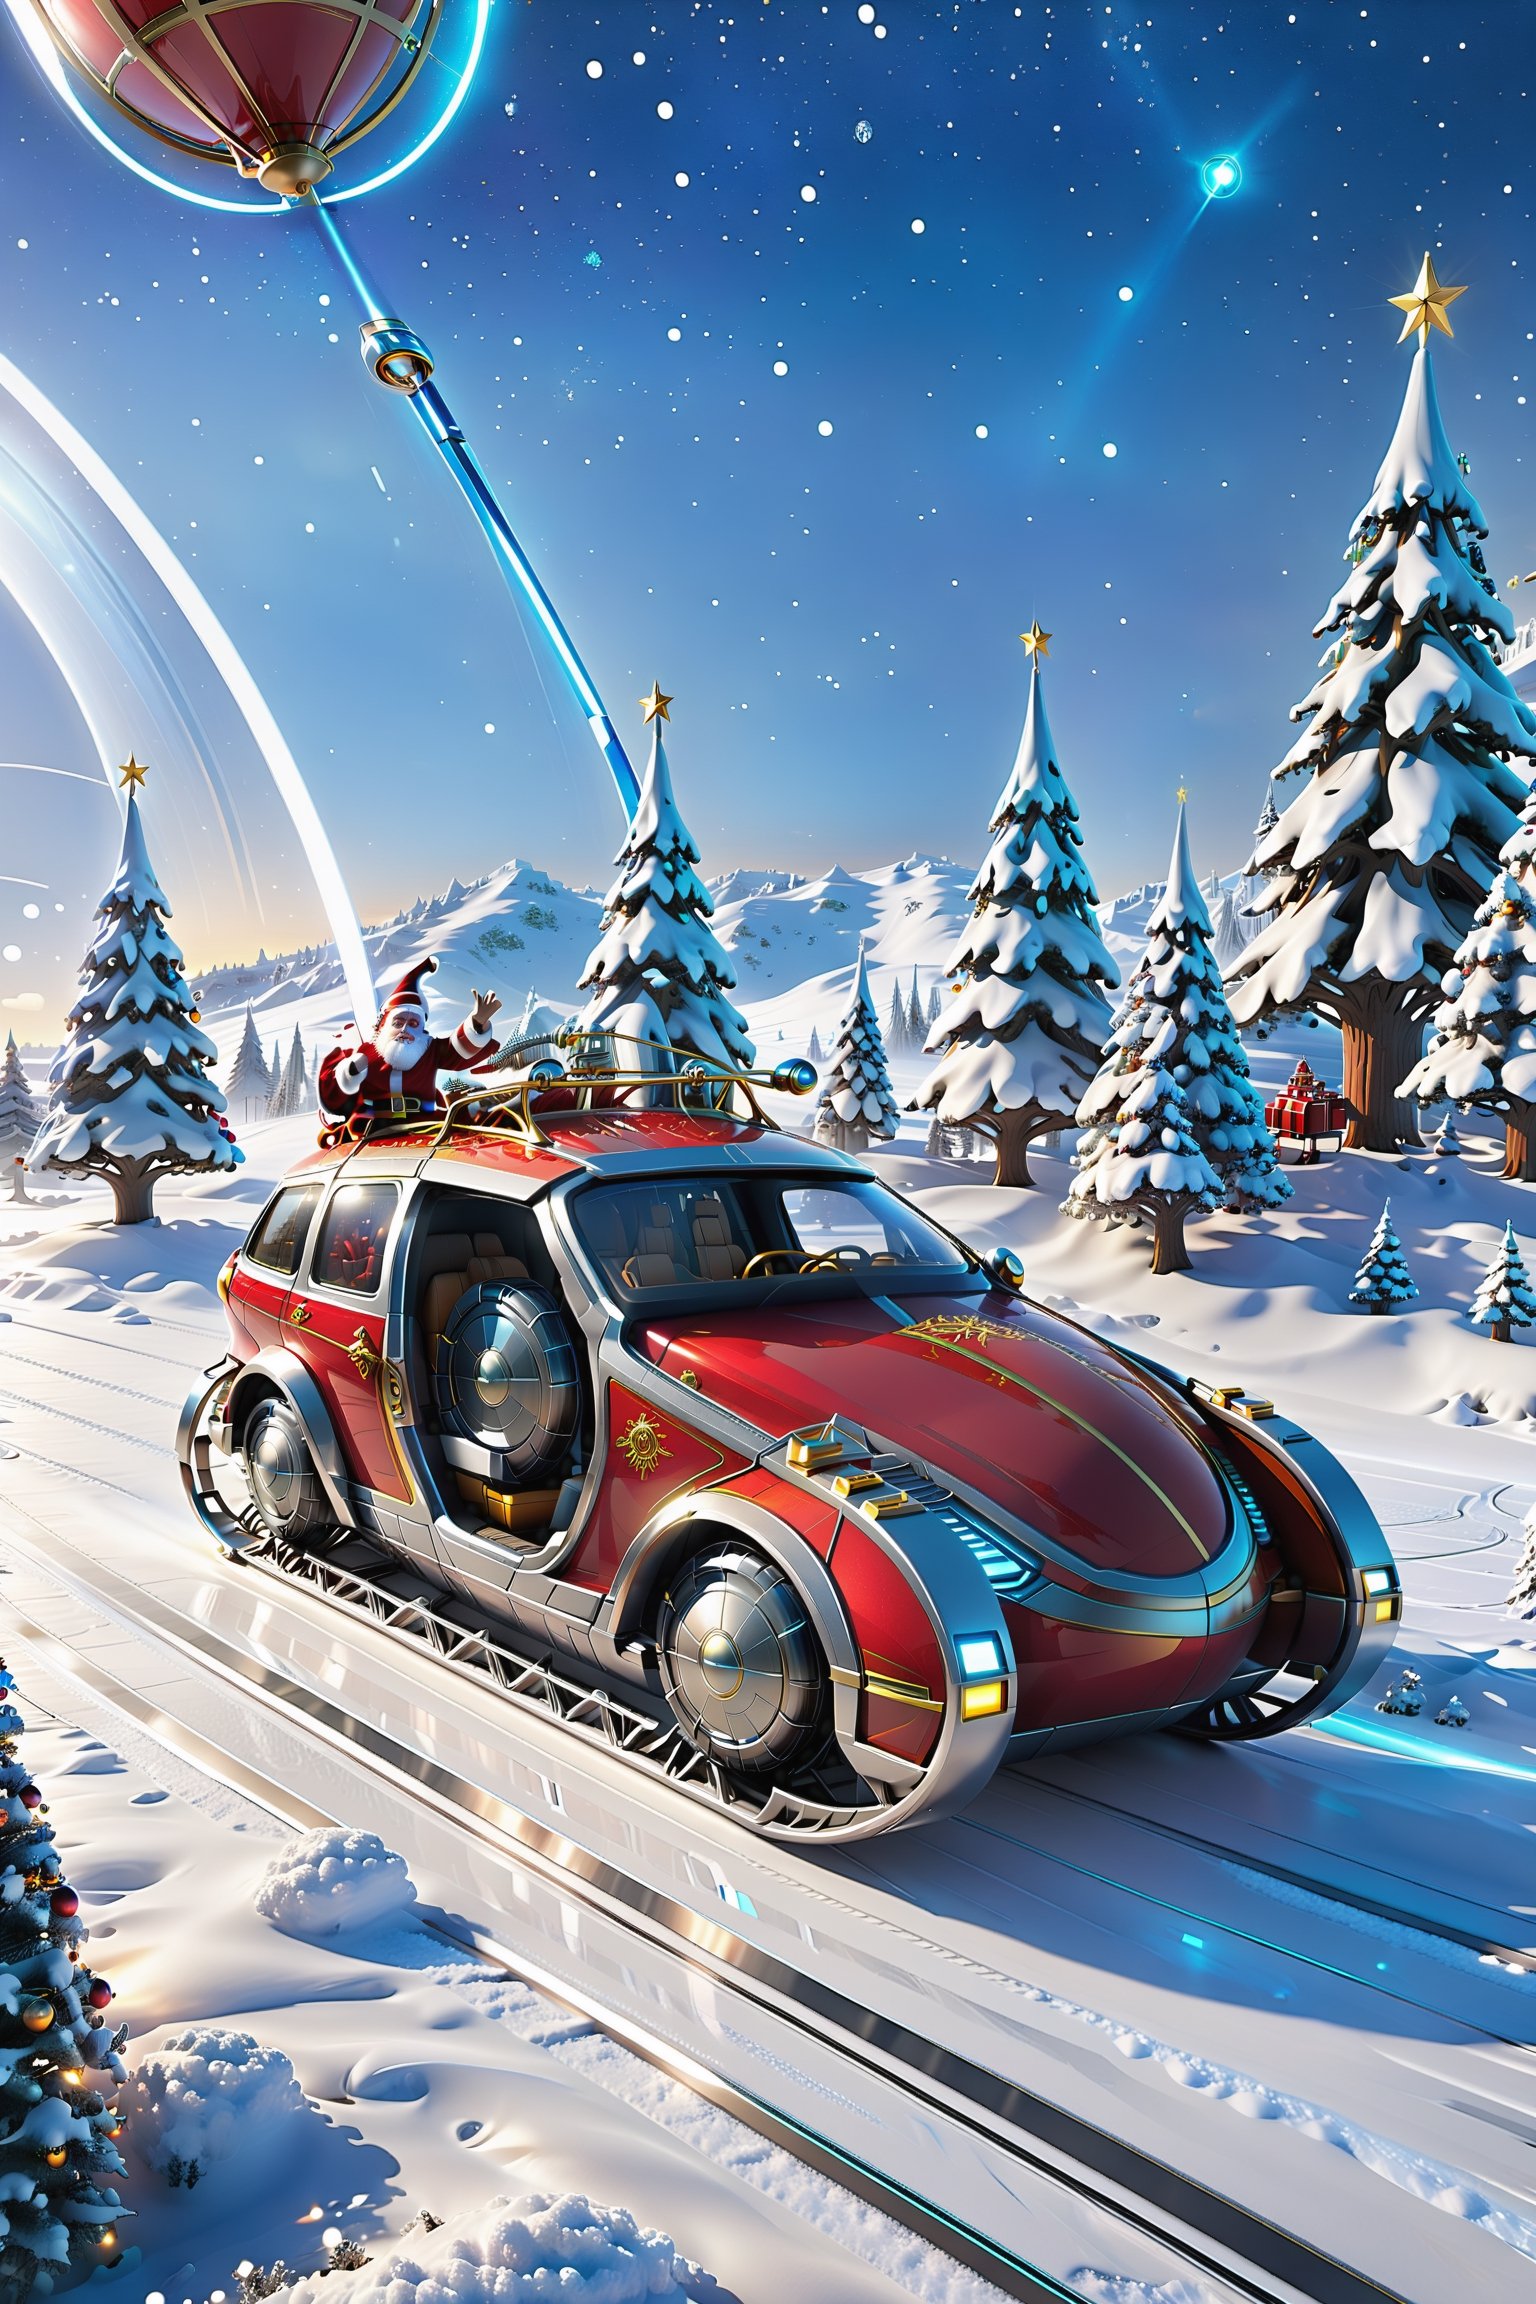 In this scene, {(((Santa Claus's sleigh is full of futuristic technology)))}, flashing with dazzling colored lights. The entire sleigh is designed in a futuristic style, with a streamlined body that appears silver or mirrored, reflecting the surrounding Christmas tree and snowy landscape.

The body is adorned with LED lights that create a bright pattern that resembles a twinkling star. The wheels are adorned with glowing decorations, creating a fantastic atmosphere. The propulsion device at the bottom of the sled car is also a masterpiece of modern technology, probably some levitation technology or a magnetic suspension system, which makes the sled glide lightly over the snow as if it were free from any resistance.

At the front of the vehicle is a transparent cockpit, allowing one to see Santa Claus sitting in a comfortable driver's seat, with his hands on a futuristic steering wheel, controlling the direction of the sleigh. There may also be some high-tech displays in the cockpit showing navigation information, gift lists or a countdown to Christmas.

Throughout the scene, the sleigh car speeds through the silvered Christmas night, leaving a sparkling track of light, like a messenger from the future world descending on this peaceful holiday night.